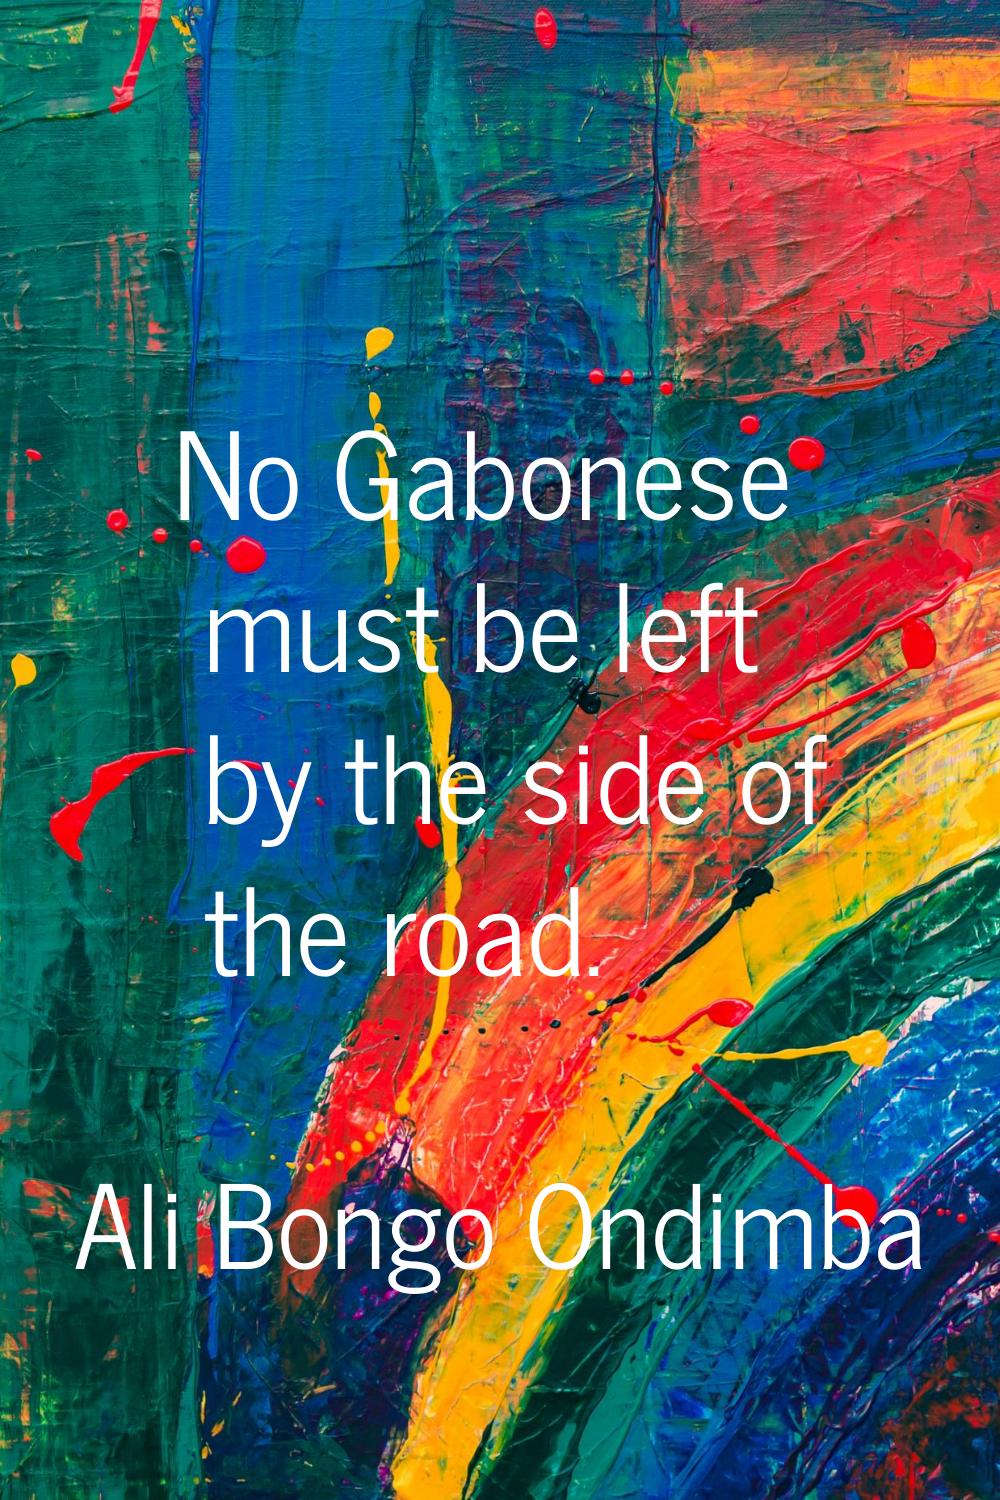 No Gabonese must be left by the side of the road.